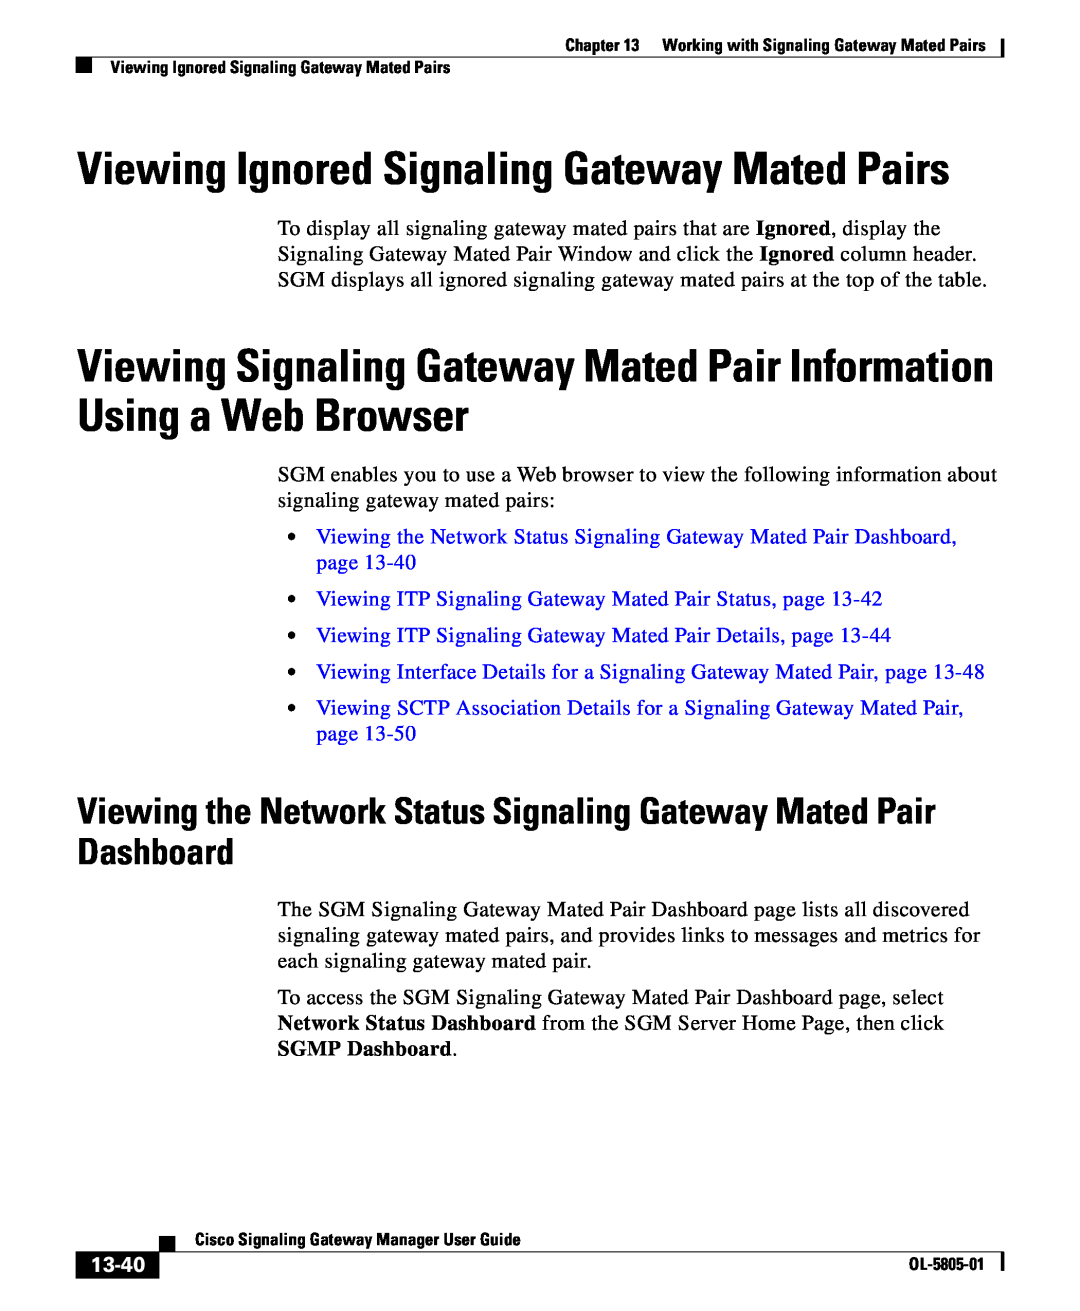 Cisco Systems OL-5805-01 manual Viewing Signaling Gateway Mated Pair Information Using a Web Browser, 13-40 